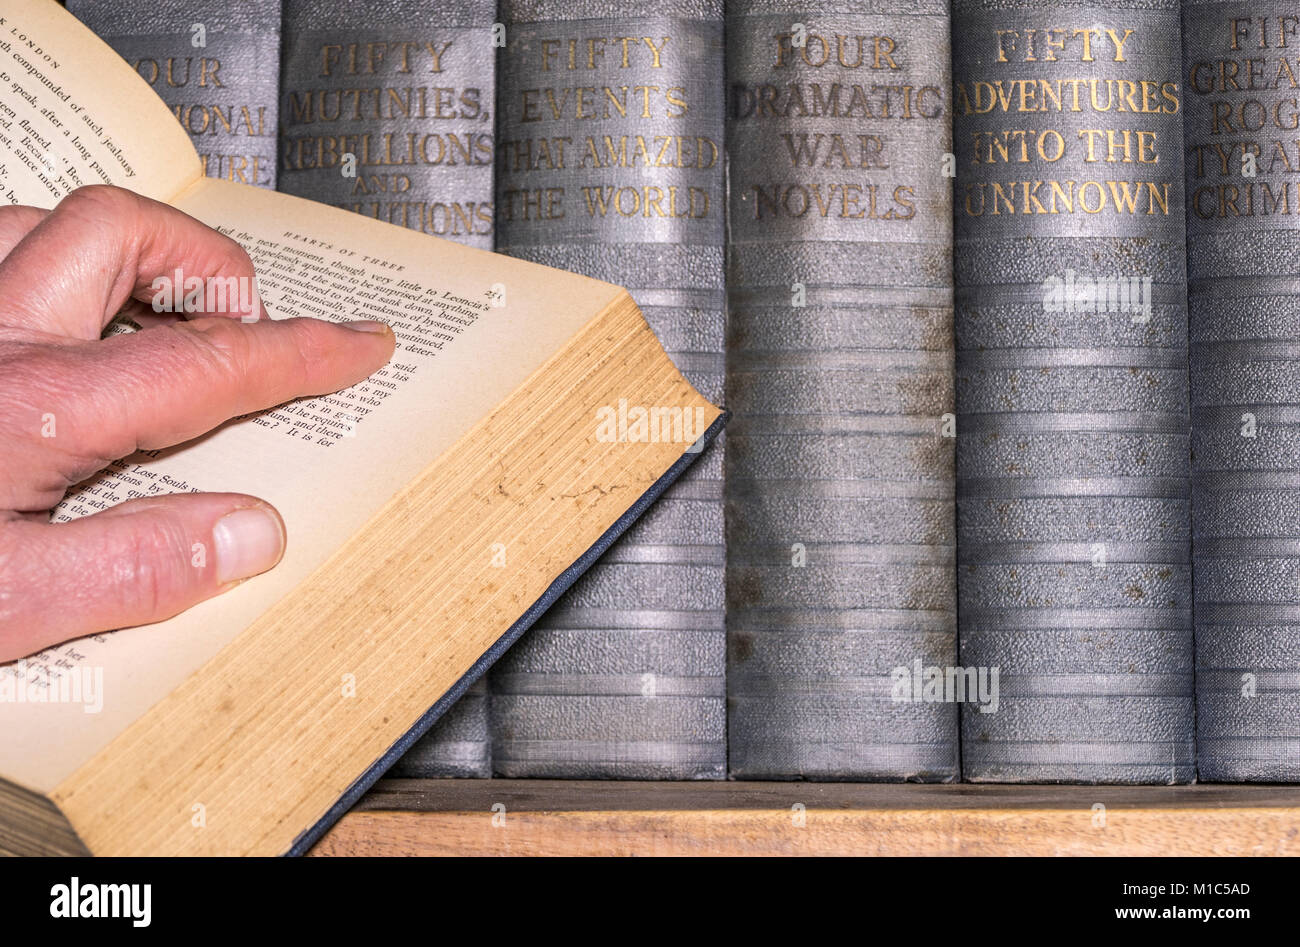 Man's hand on an open book, published in English, with a shelf of vintage hard back books in the background. England, UK. Stock Photo